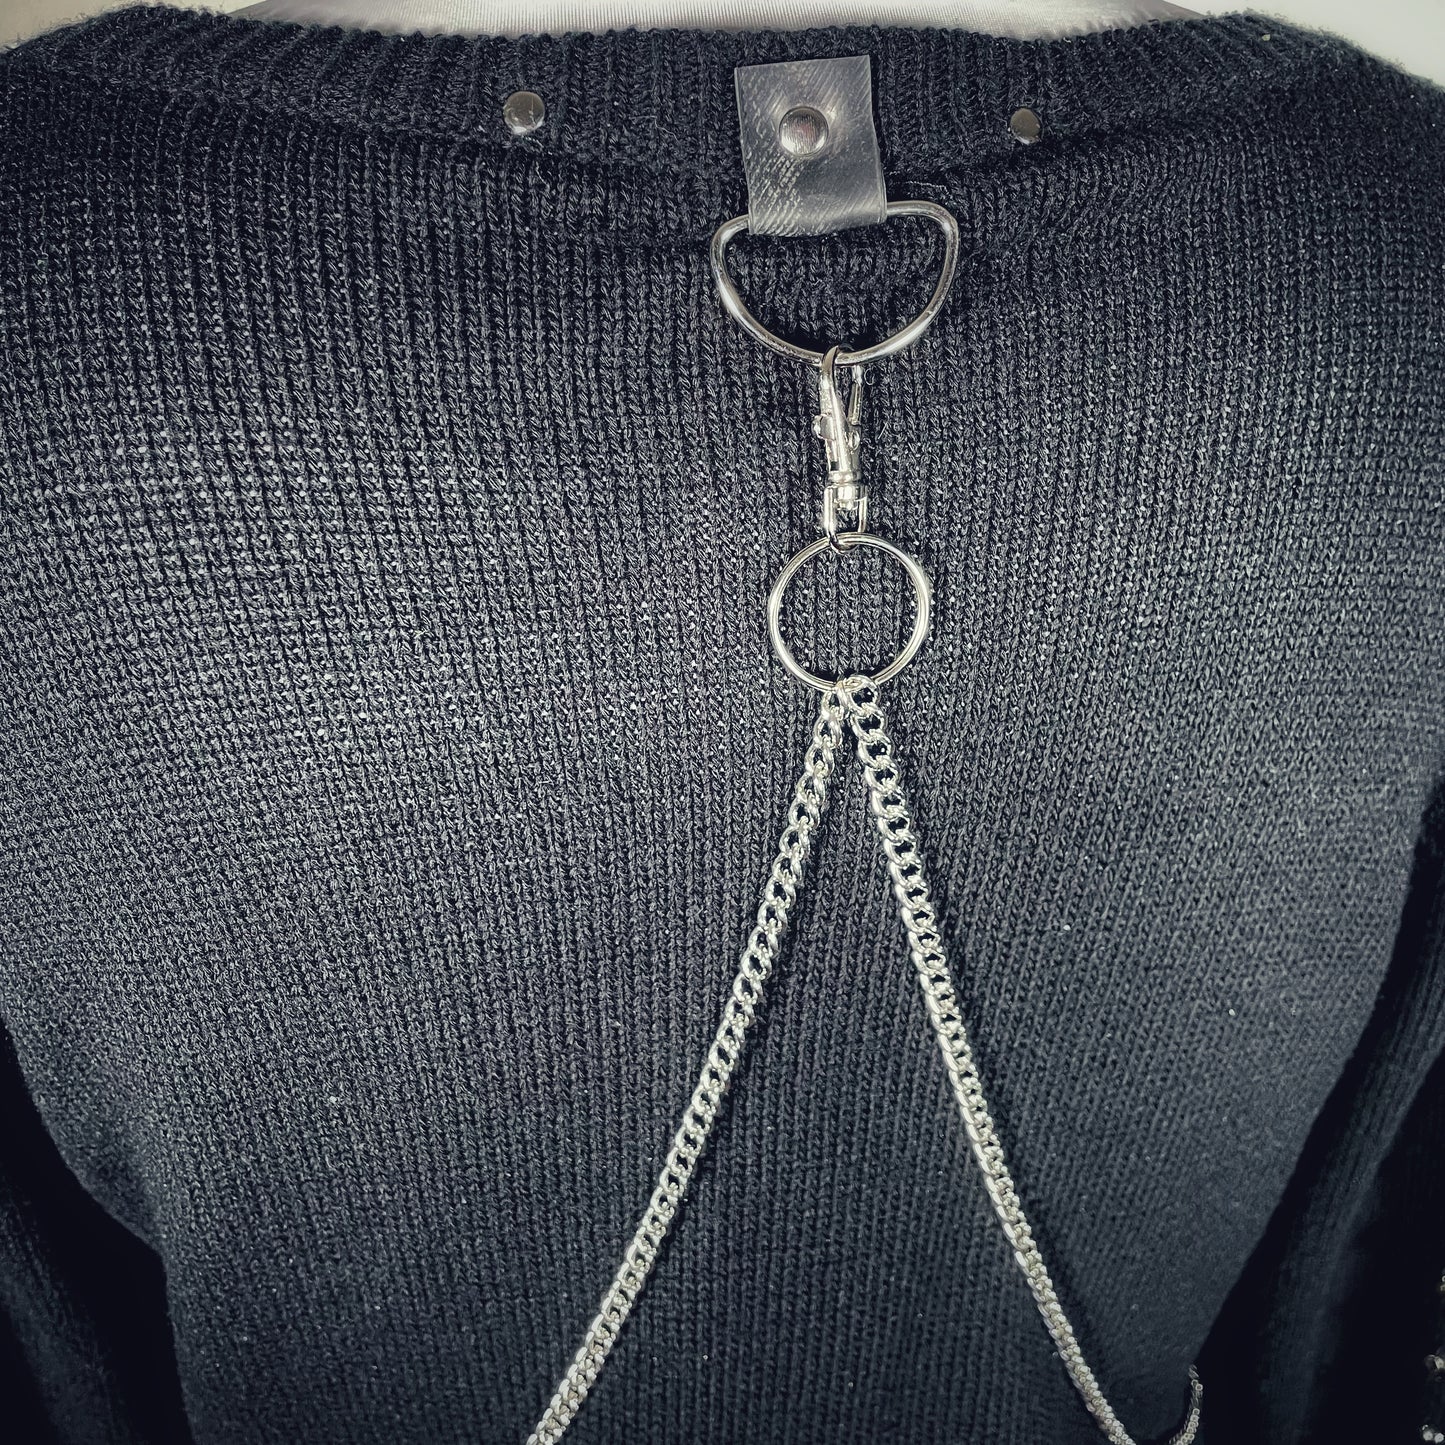 Goth Bondage Sweater with Chain Harness